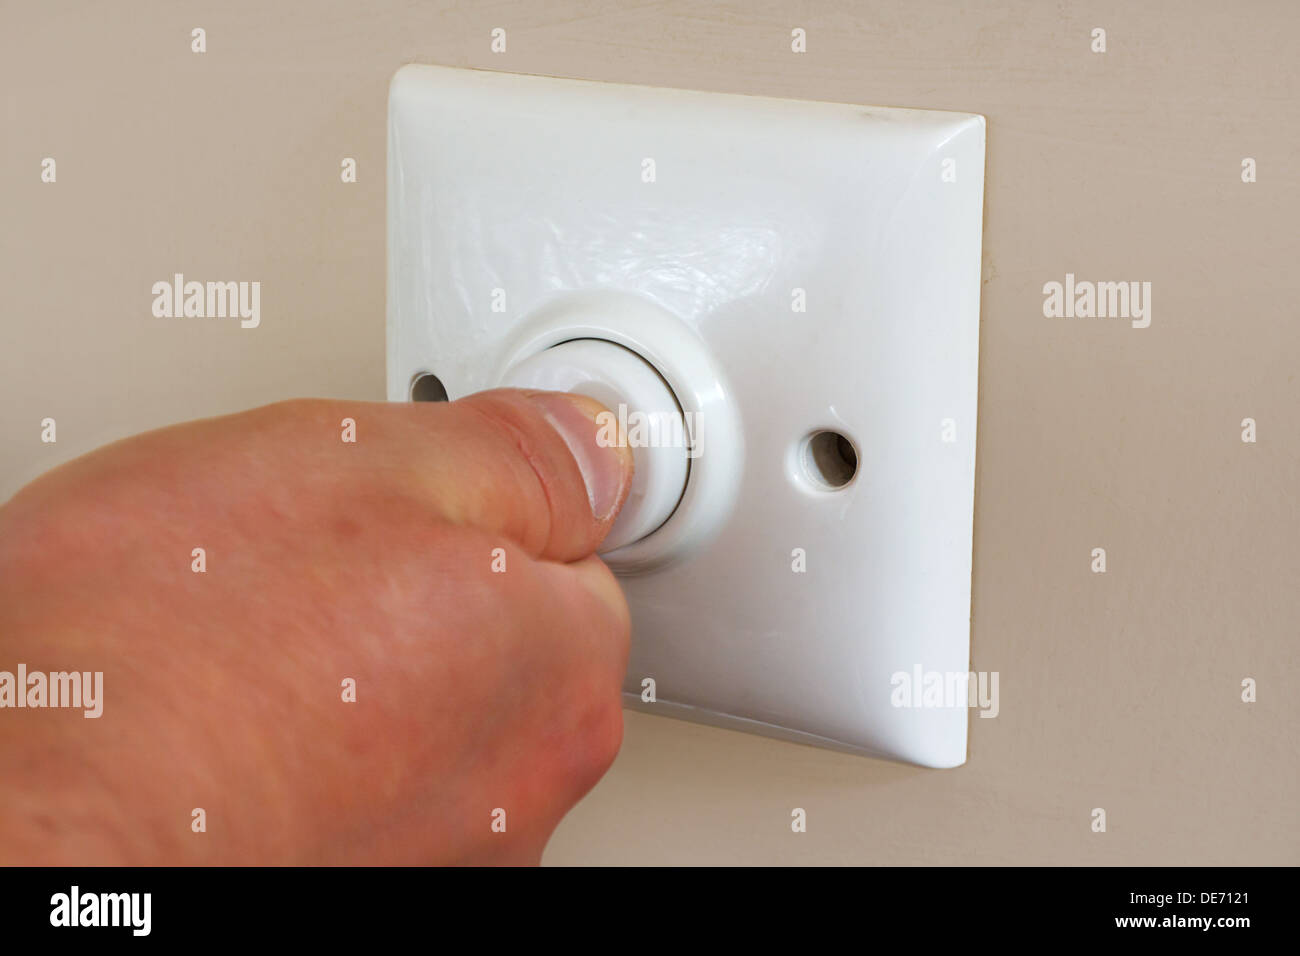 pressing an energy efficient timed light switch designed to save electricity and reduce power usage Stock Photo